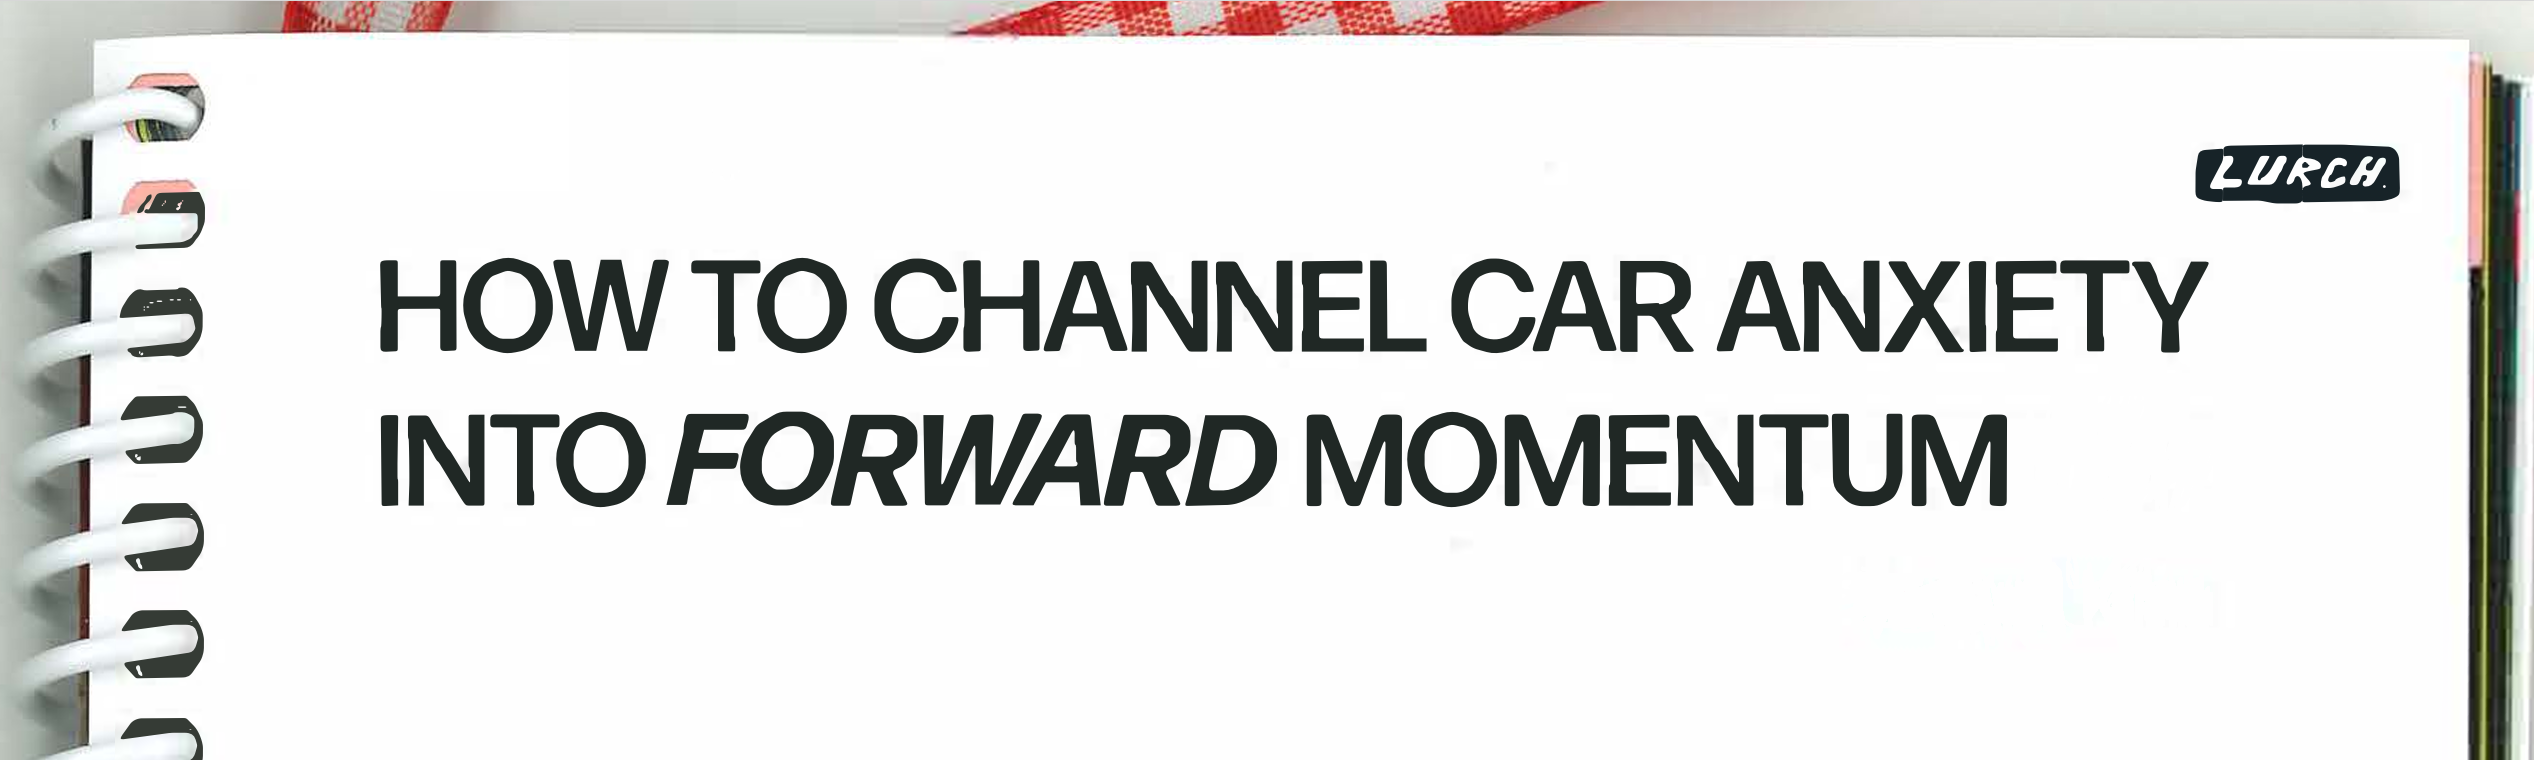 Headline of HOW TO CHANNEL CAR ANXIETY INTO FORWARD MOMENTUM as seen in Lurch Zine, Issue 2.